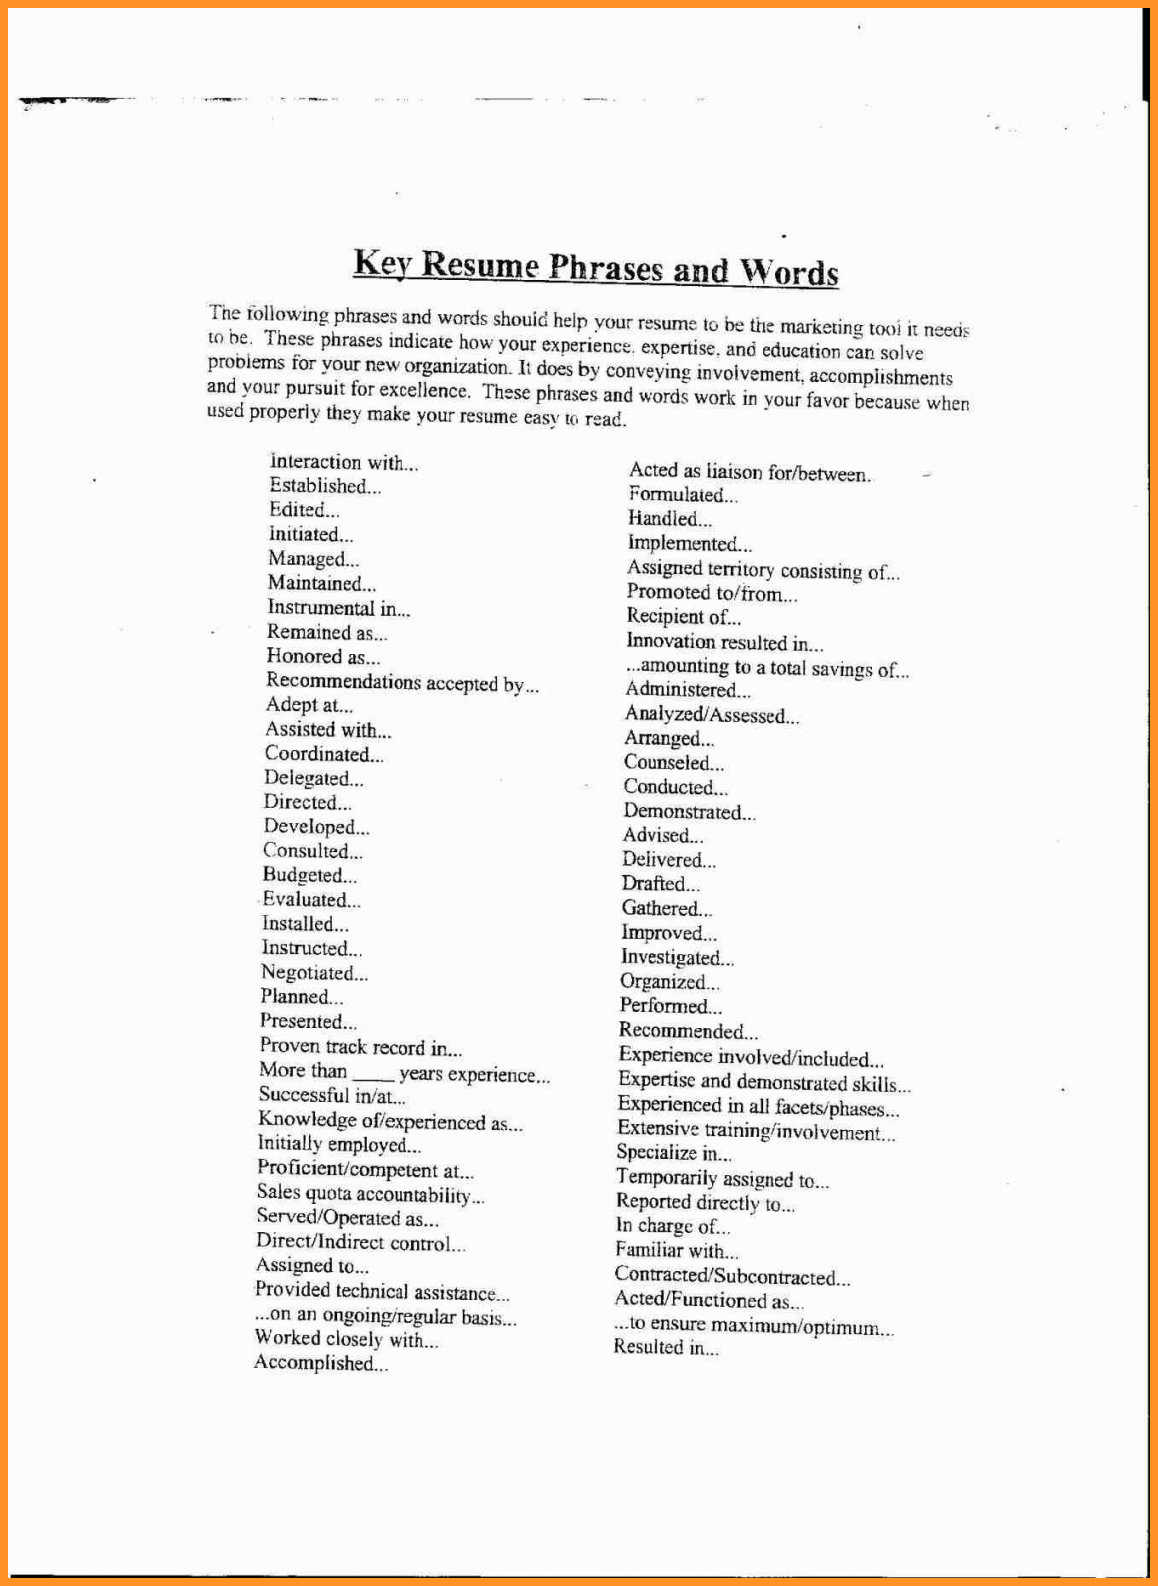 Cover Letter Words Words To Use In Cover Letter Words To Use In Cover Letter 6 cover letter words|wikiresume.com